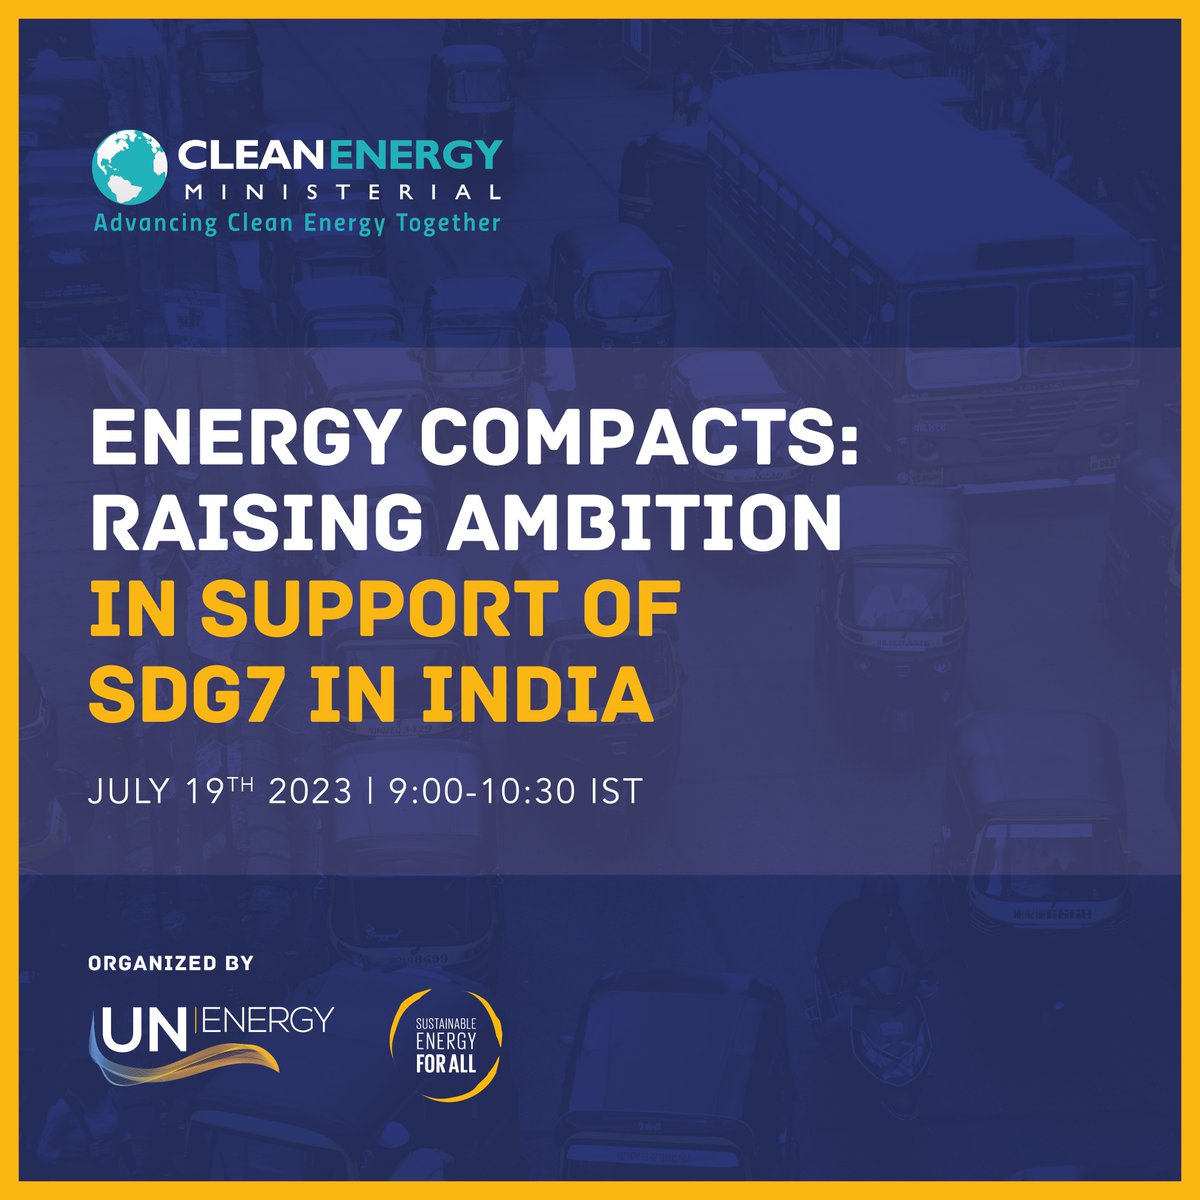 How do we get on track for #SDG7 by 2030? 🌎
Find out 👉what Indian government, private sector, and civil society organizations are doing at the 14th Clean Energy Ministerial⚡️
#EnergyCompacts @UN_Energy @seforallorg #CEM14MI8

Learn more: un.org/en/energycompa…